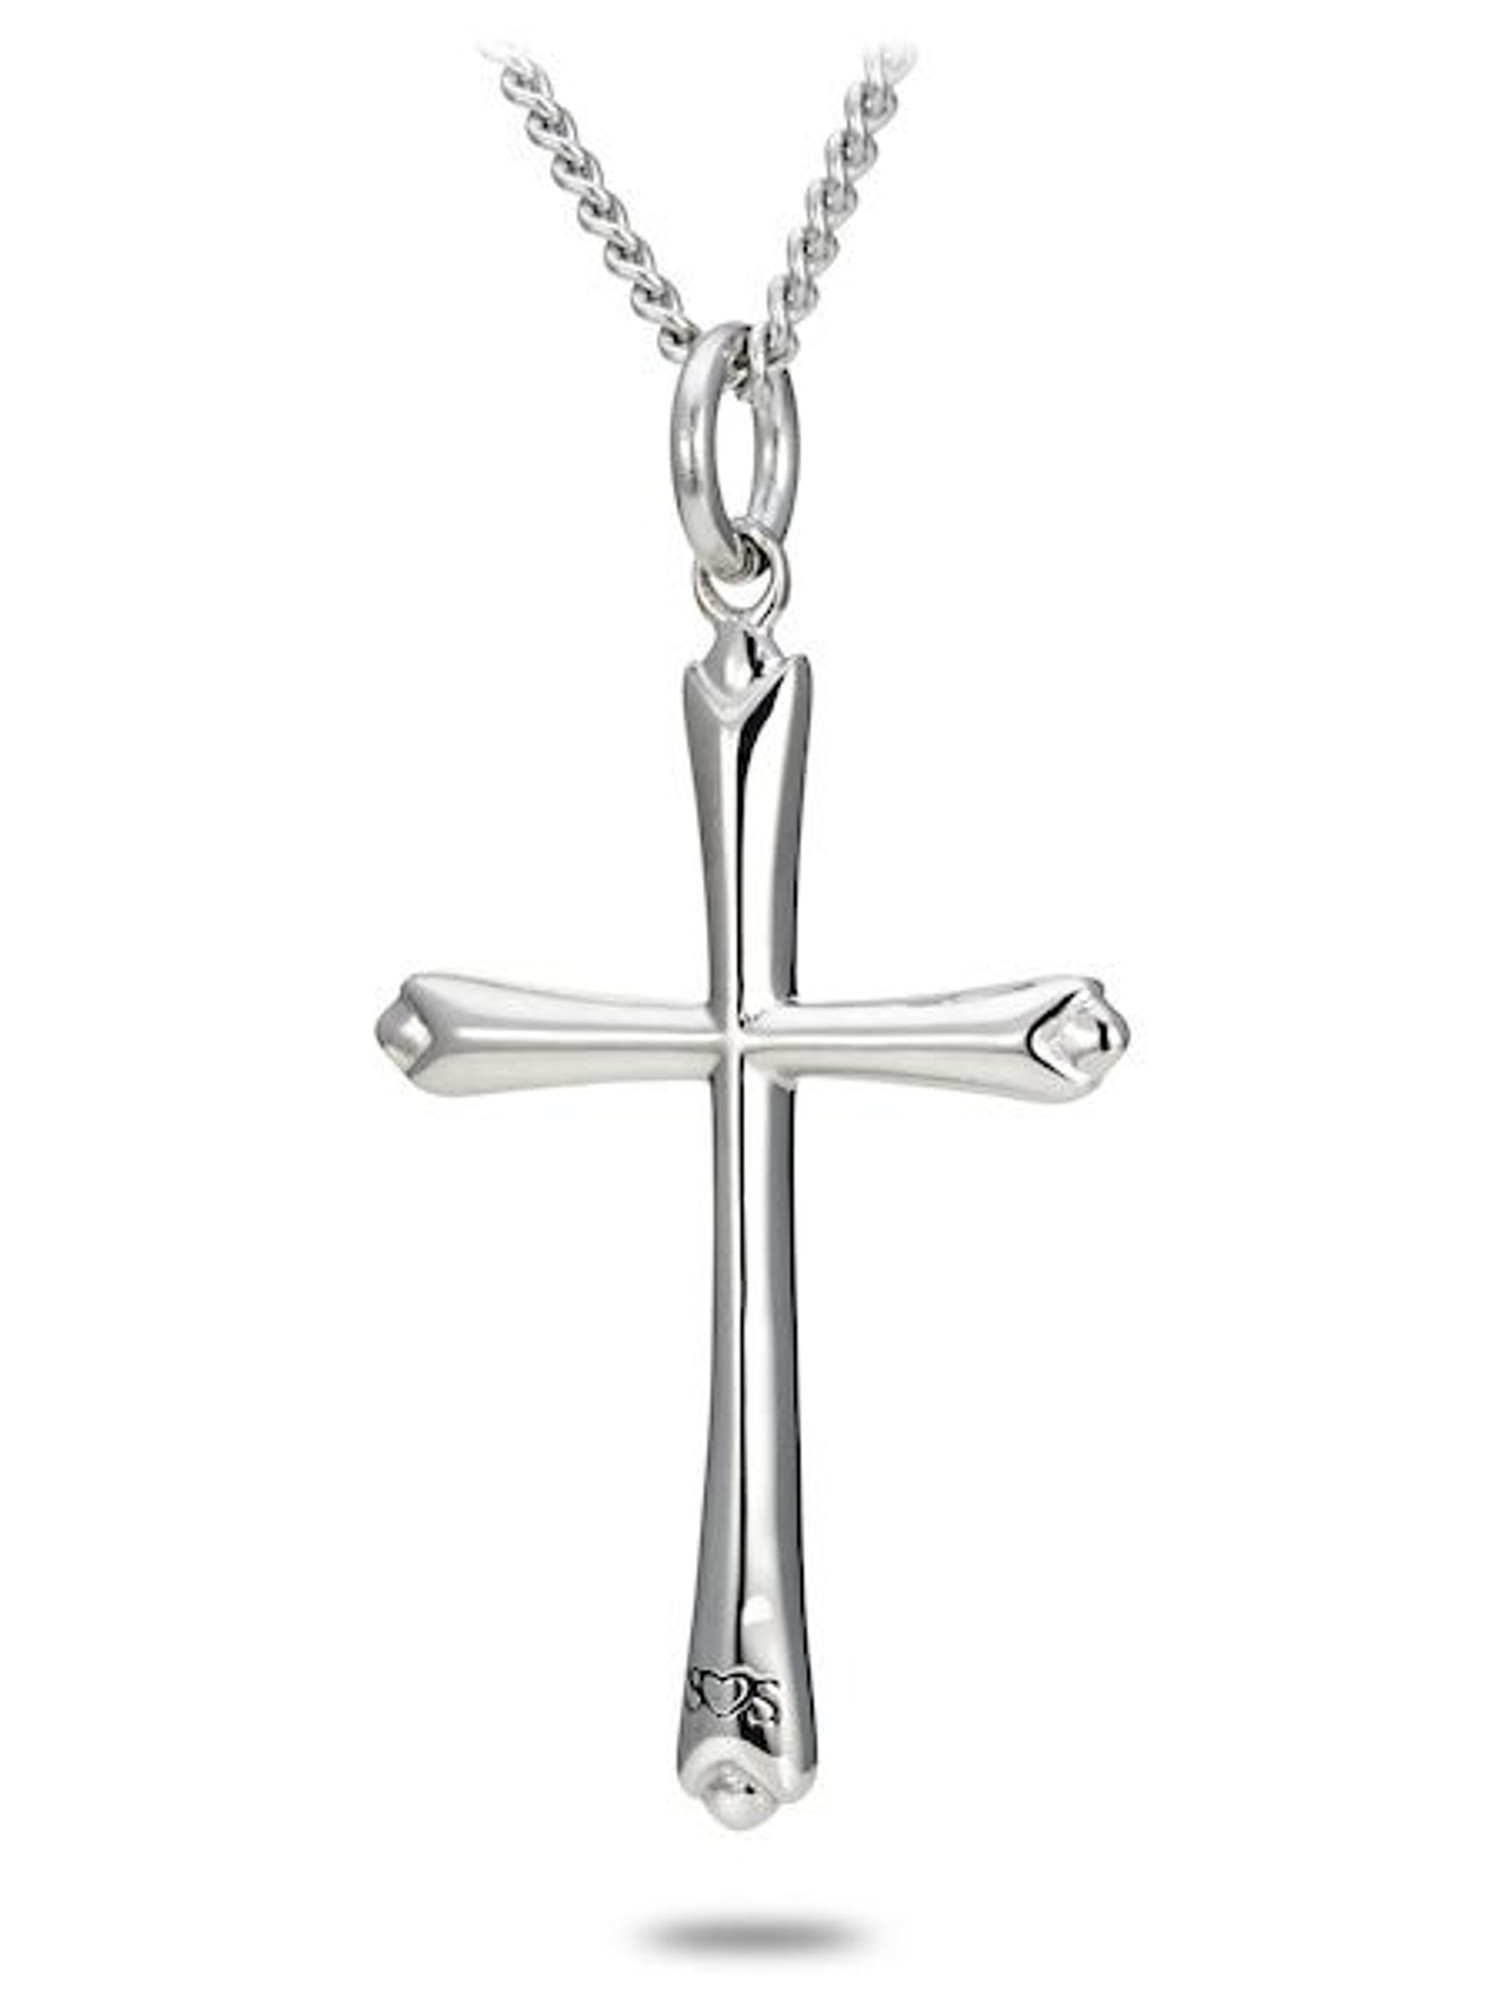 20 inch Mens Sterling Silver Cross Necklace